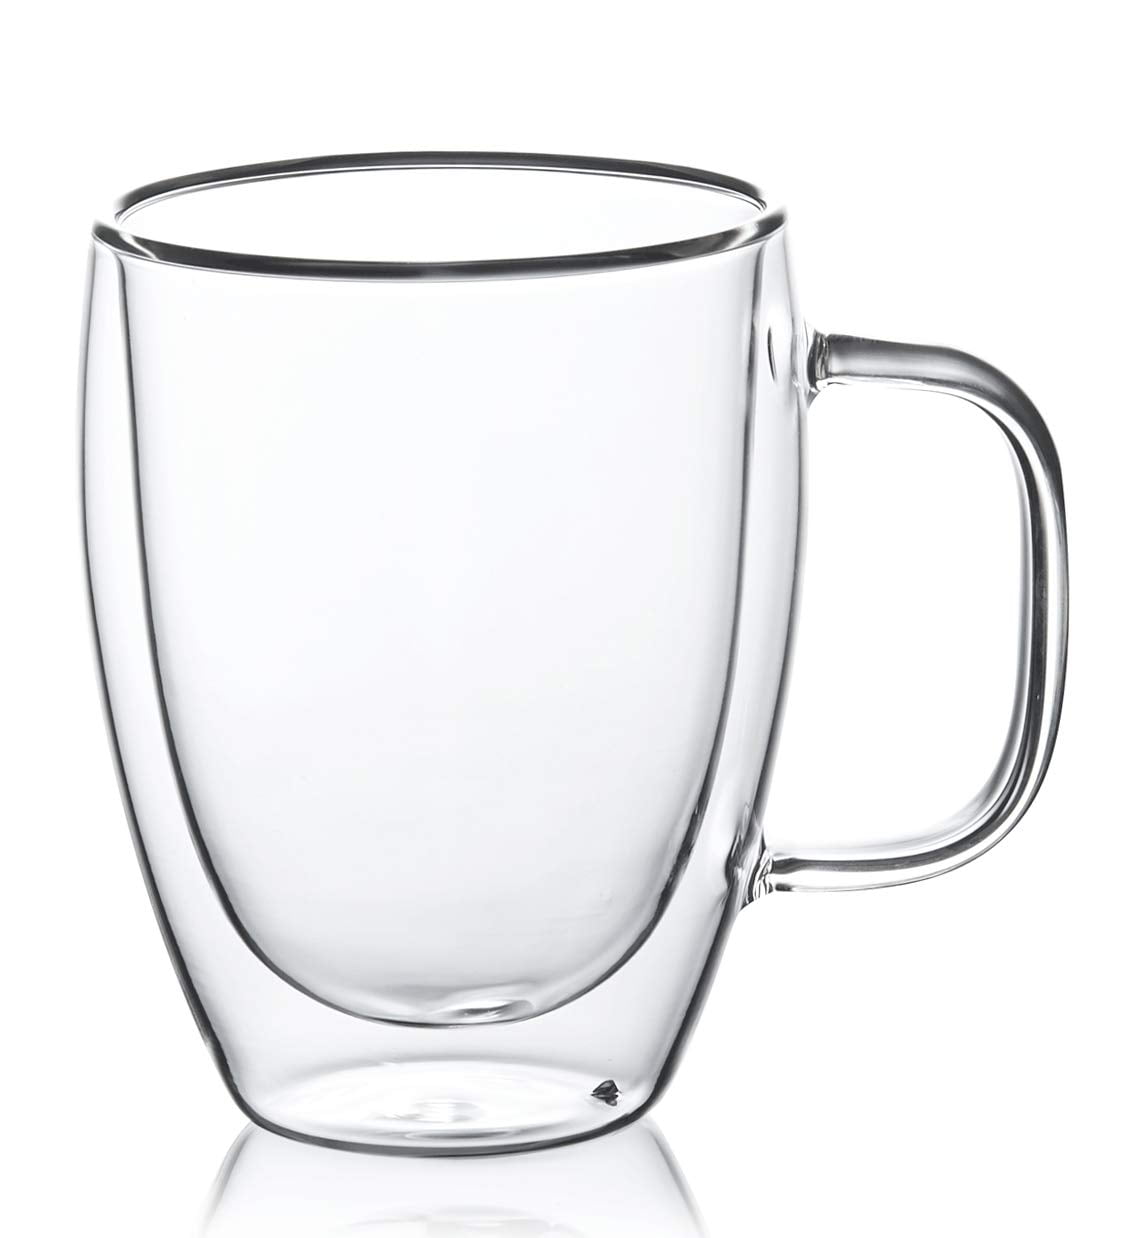 JNSMFC Double Walled Glass Coffee Mugs with Handle,2-Pack 12oz